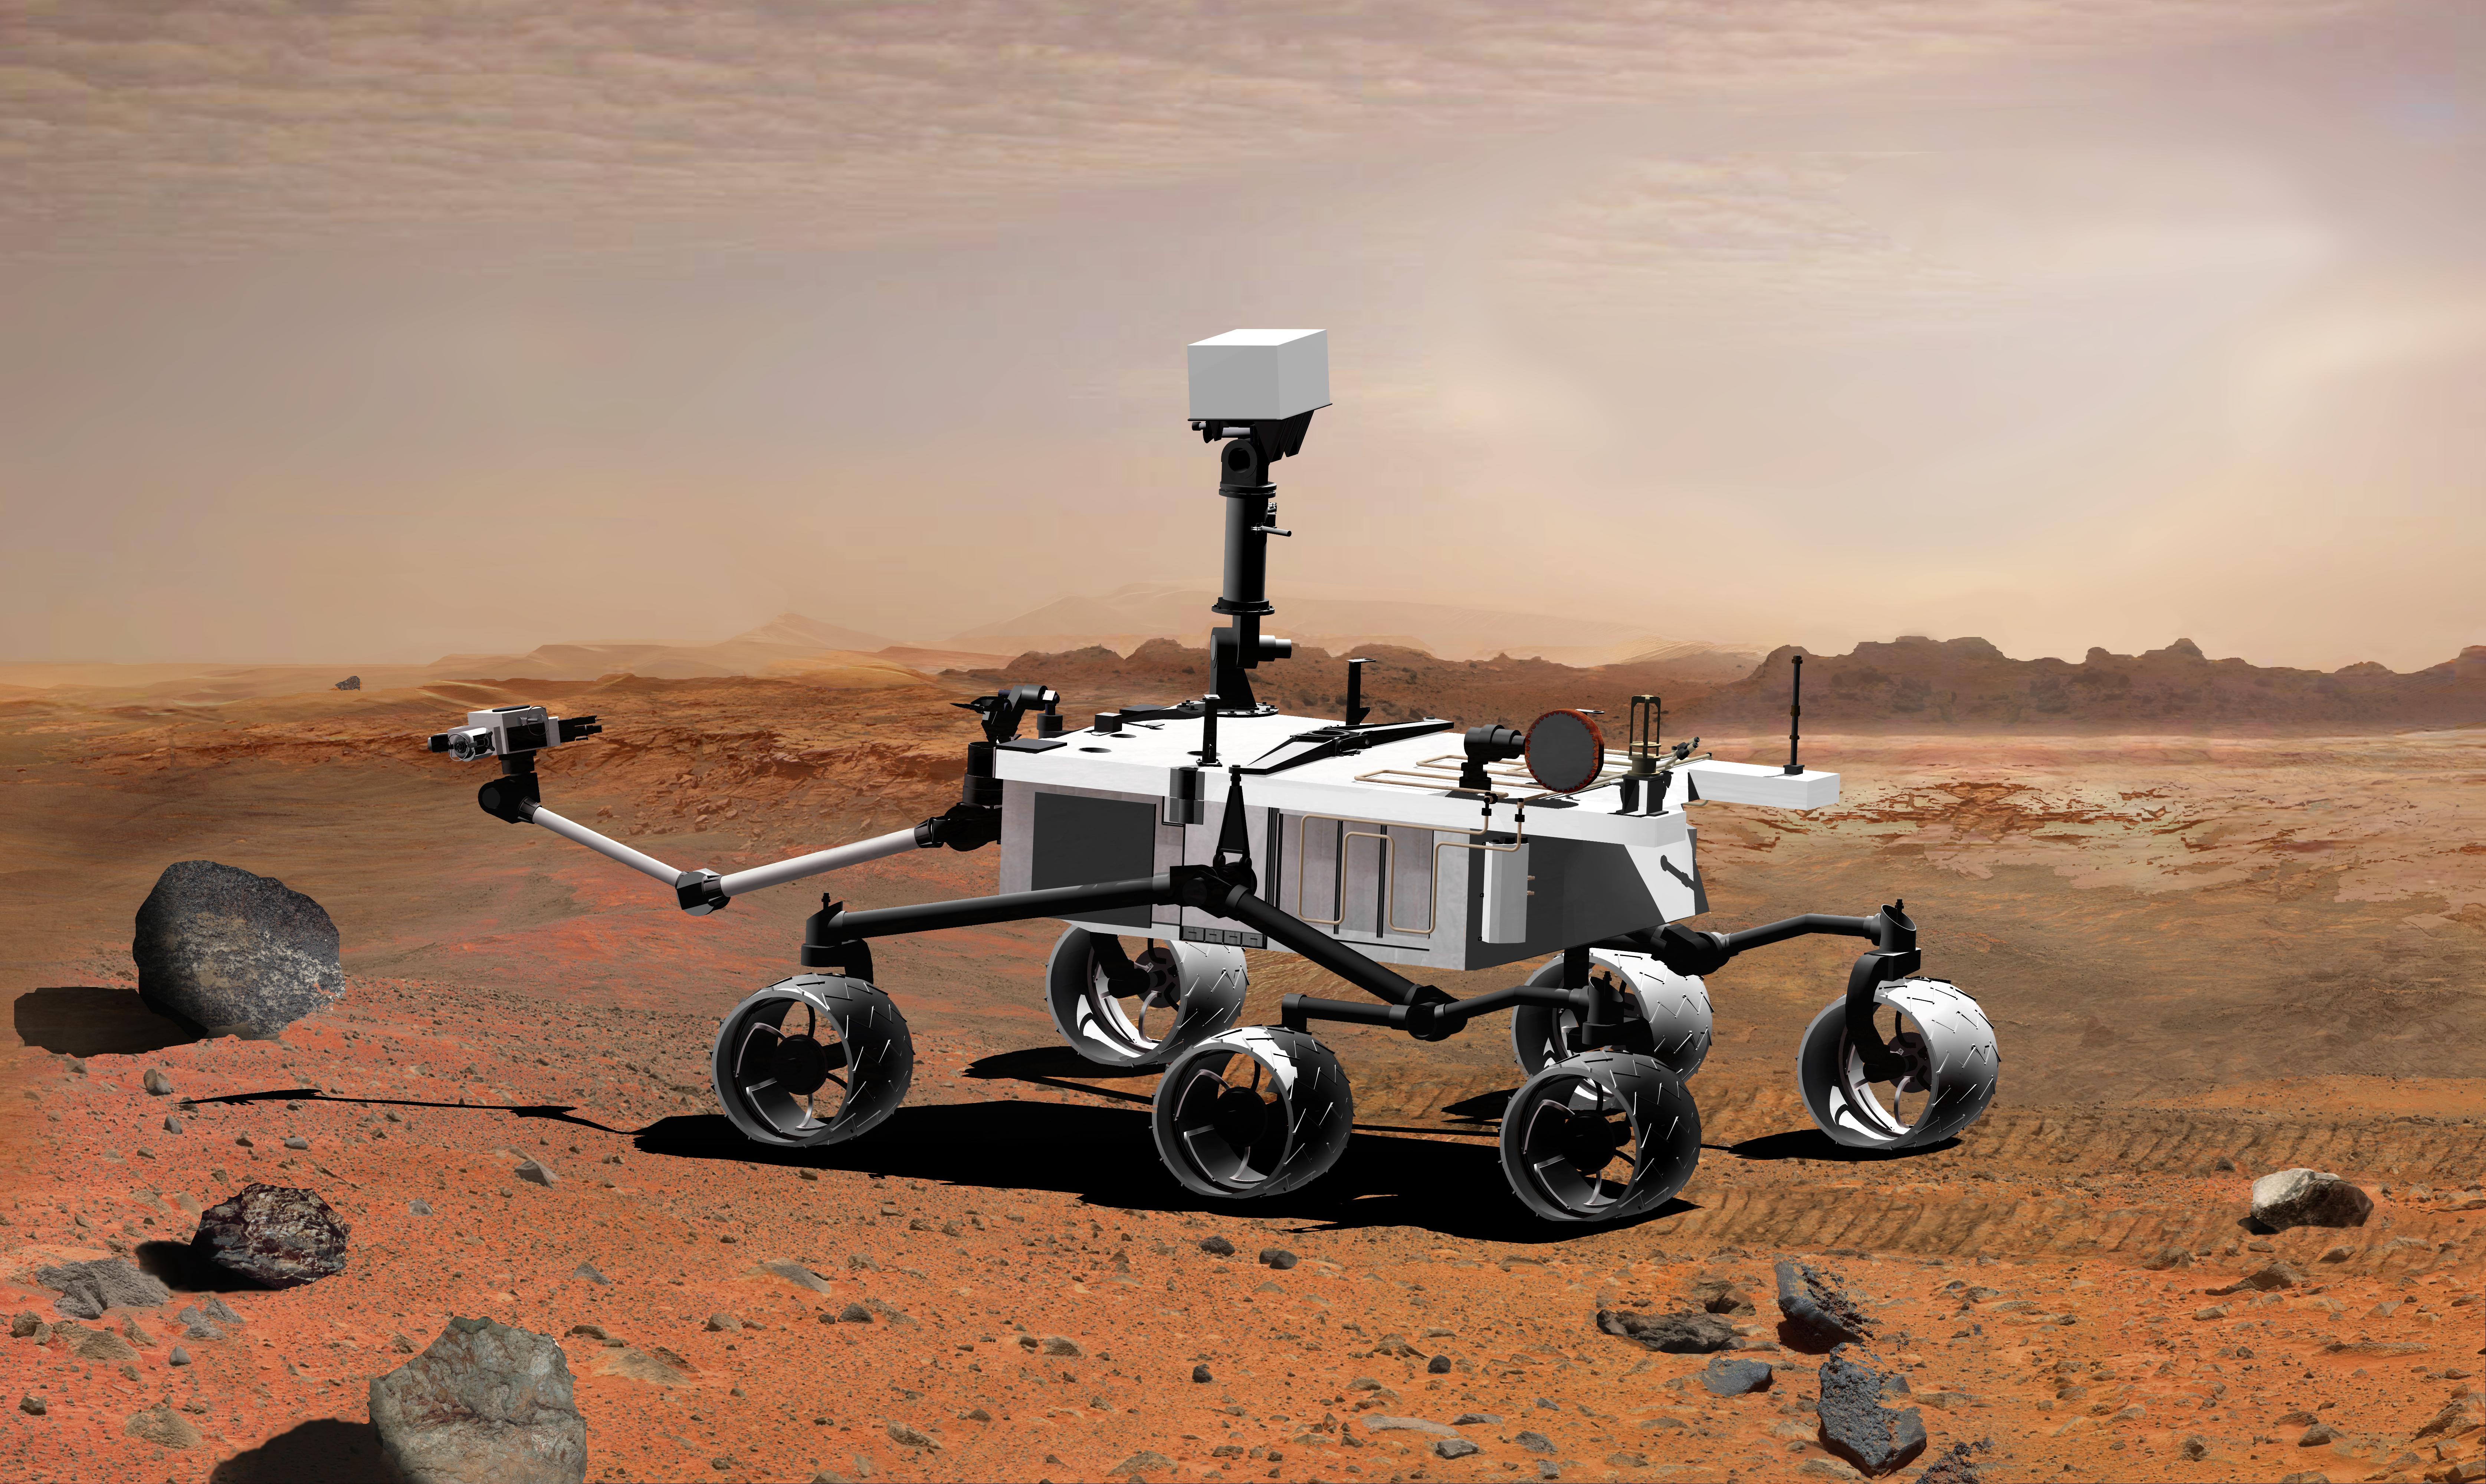 In late 2011, NASA plans to launch the largest, most capable rover ever sent to another planet. 